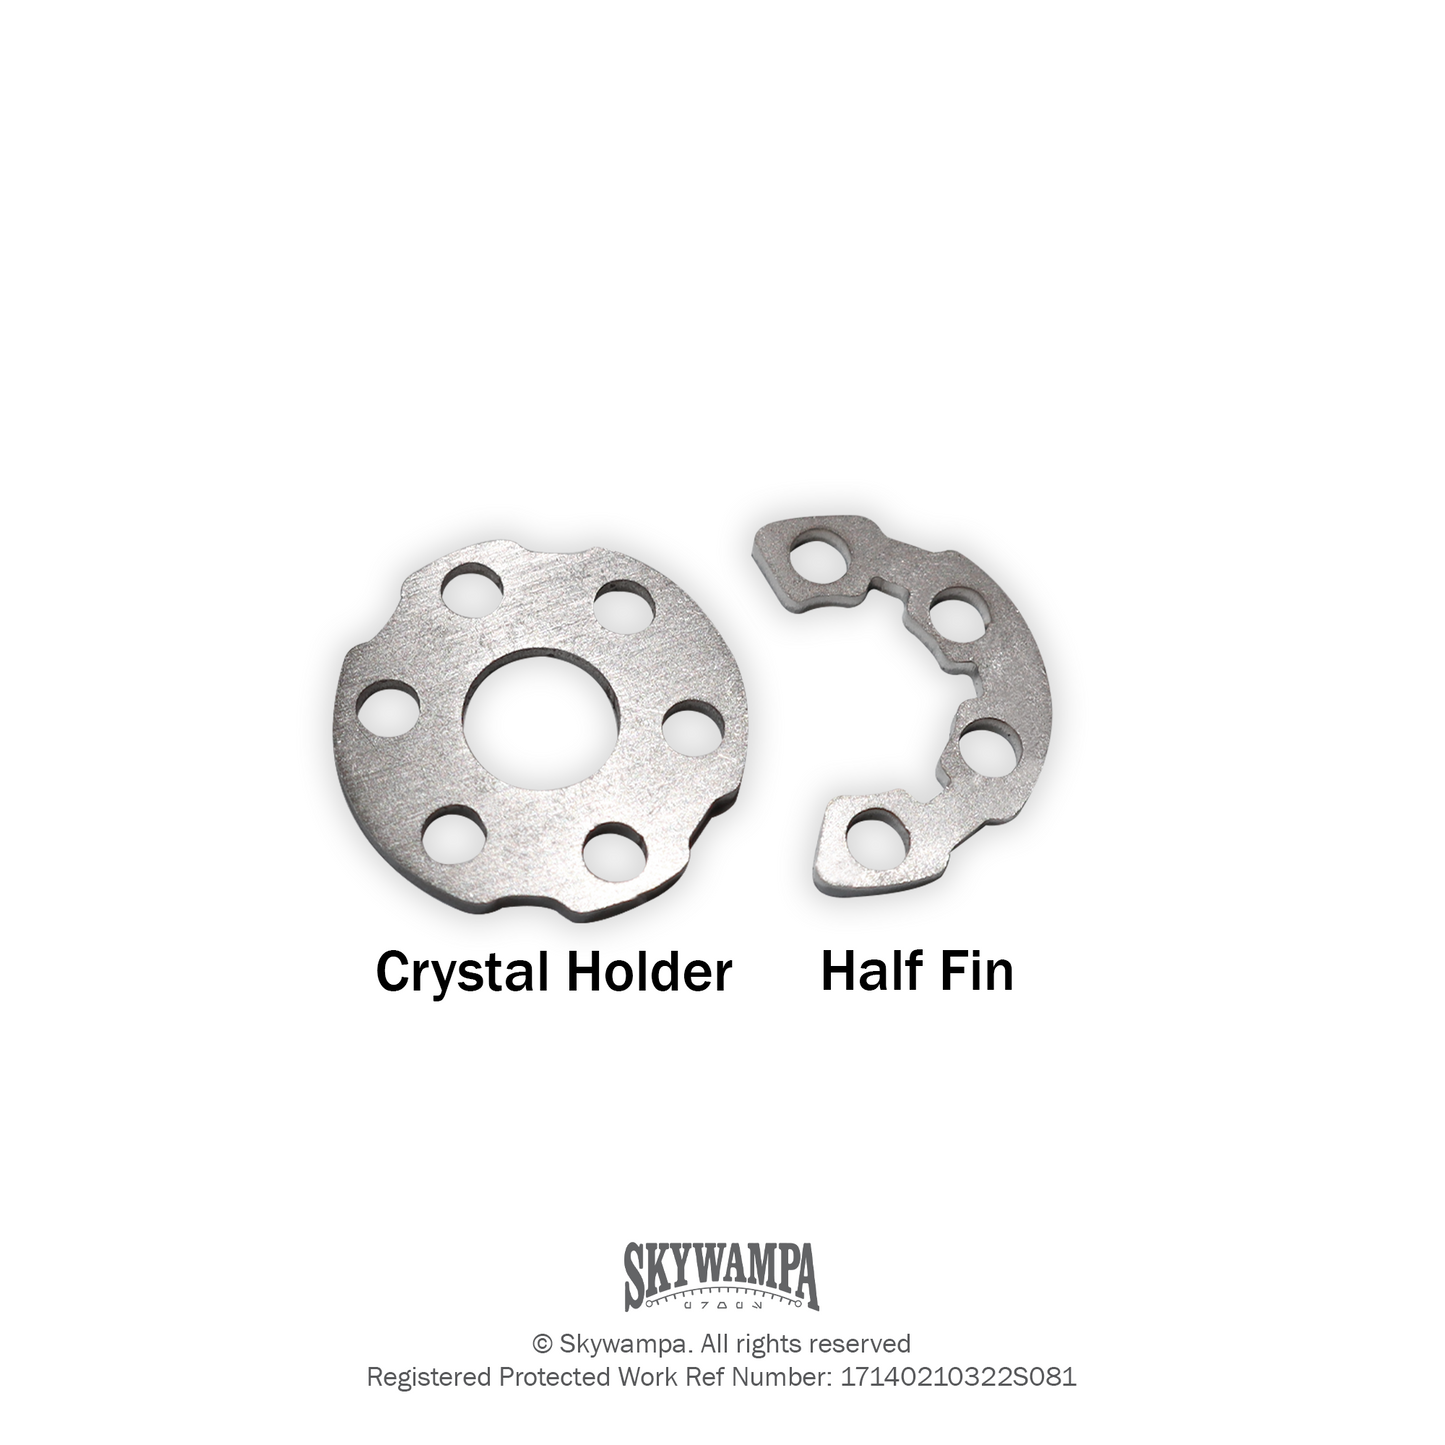 7/8 inch Crystal Chambers Parts - Stainless Steel